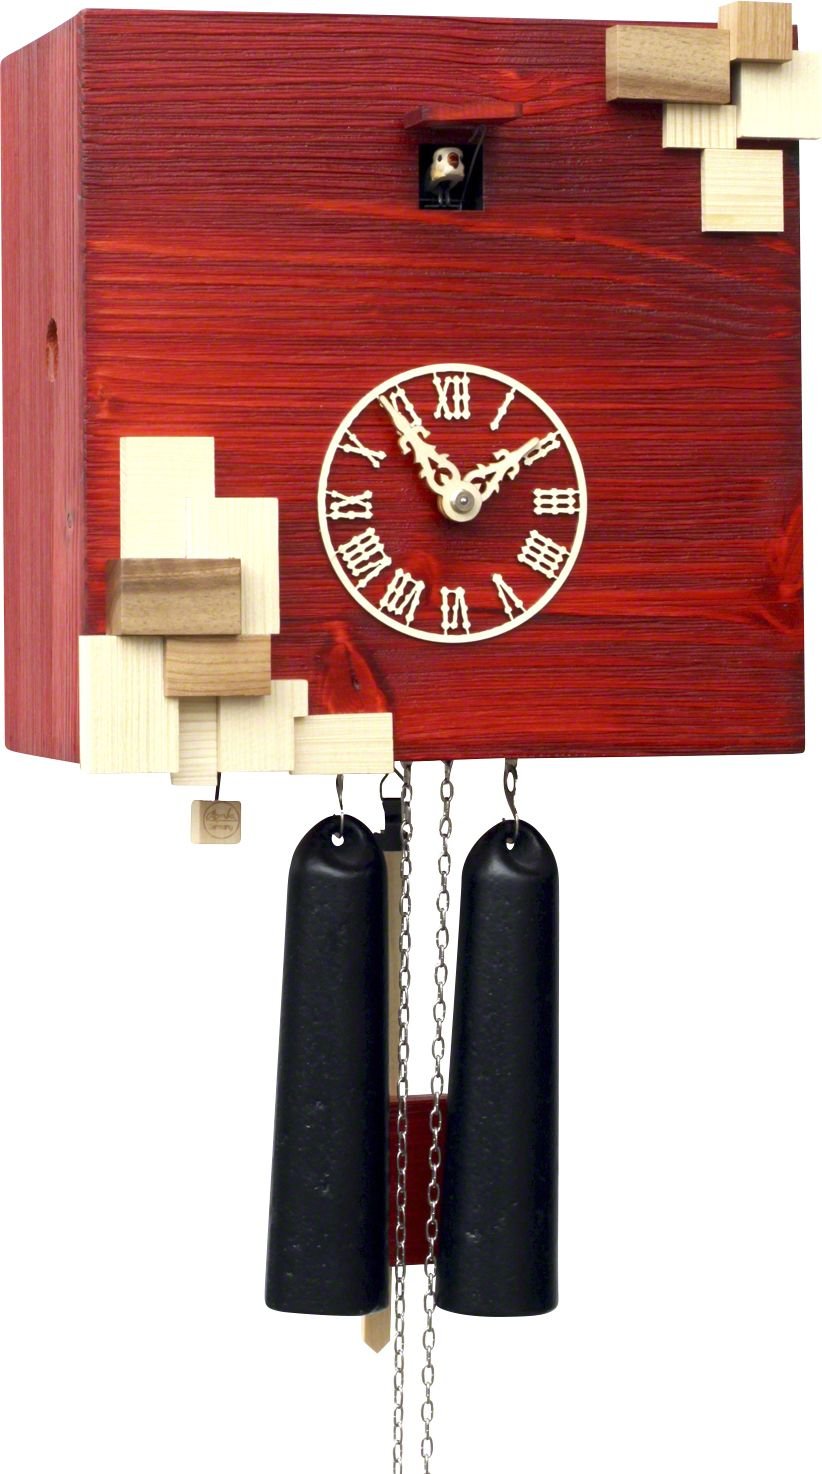 Cuckoo Clock Modern Art Style 8 Day Movement 25cm by Rombach & Haas